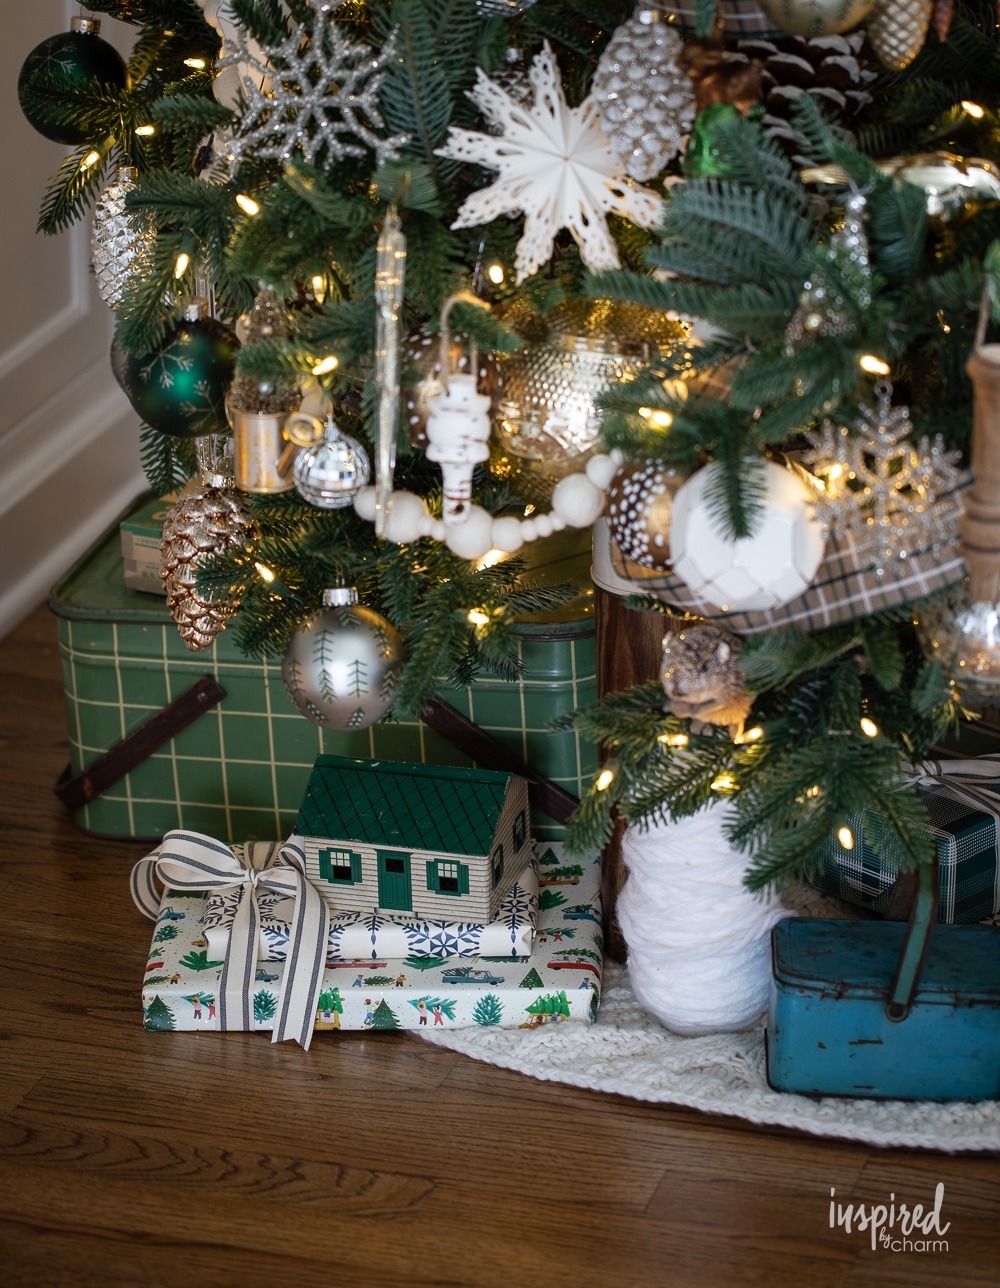 gifts under a decorated christmas tree.